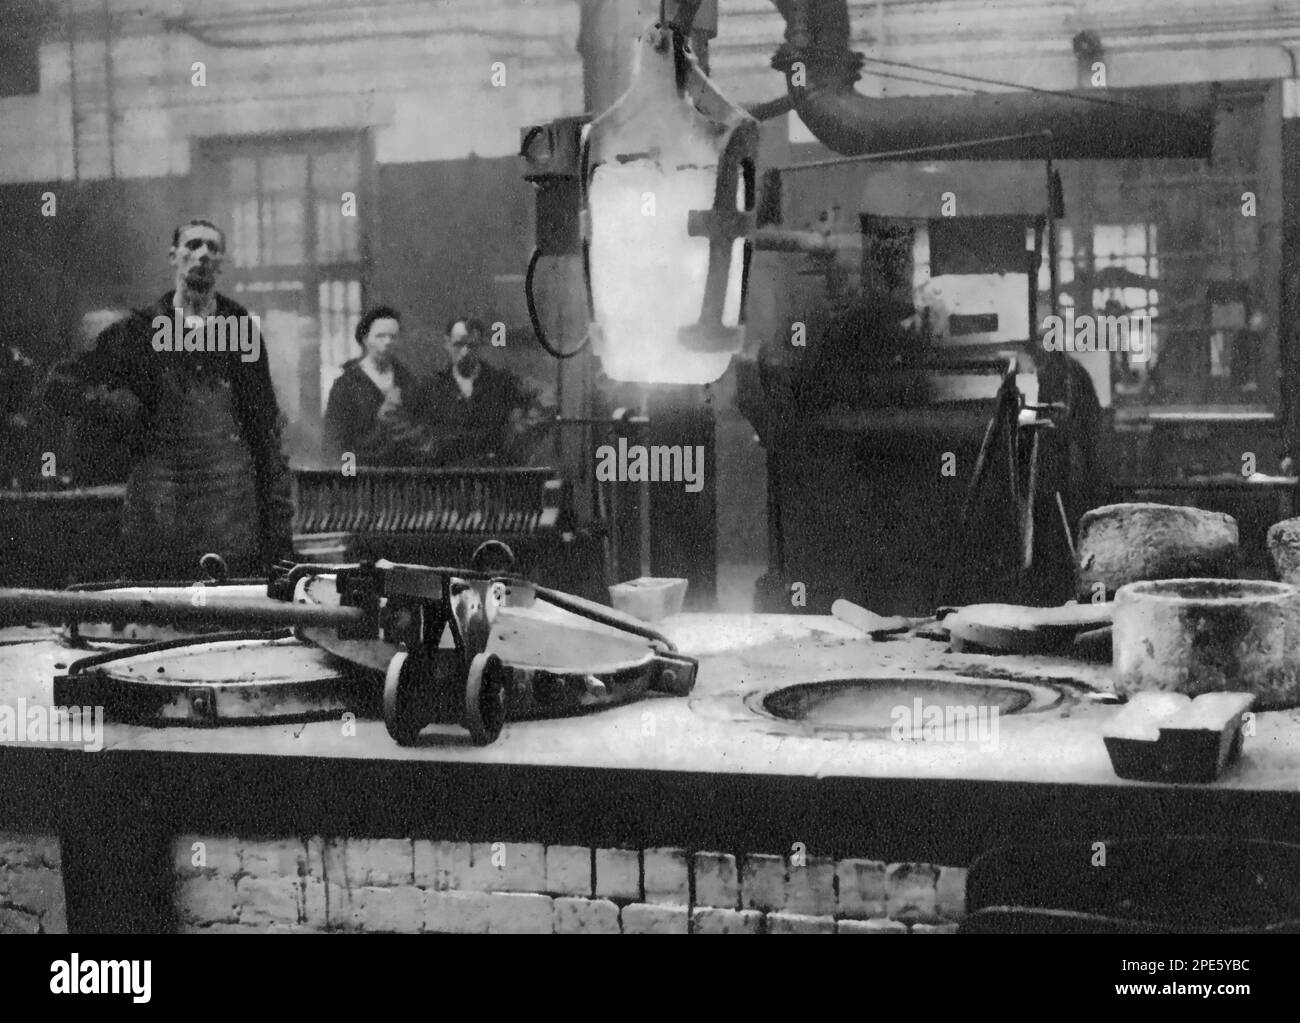 The Royal Mint, Tower Hill, London, c1933. A crucible of molten silver is lifted out of the furnace and carried to the machine that will stir the liquid metal before it is poured into moulds. Stock Photo